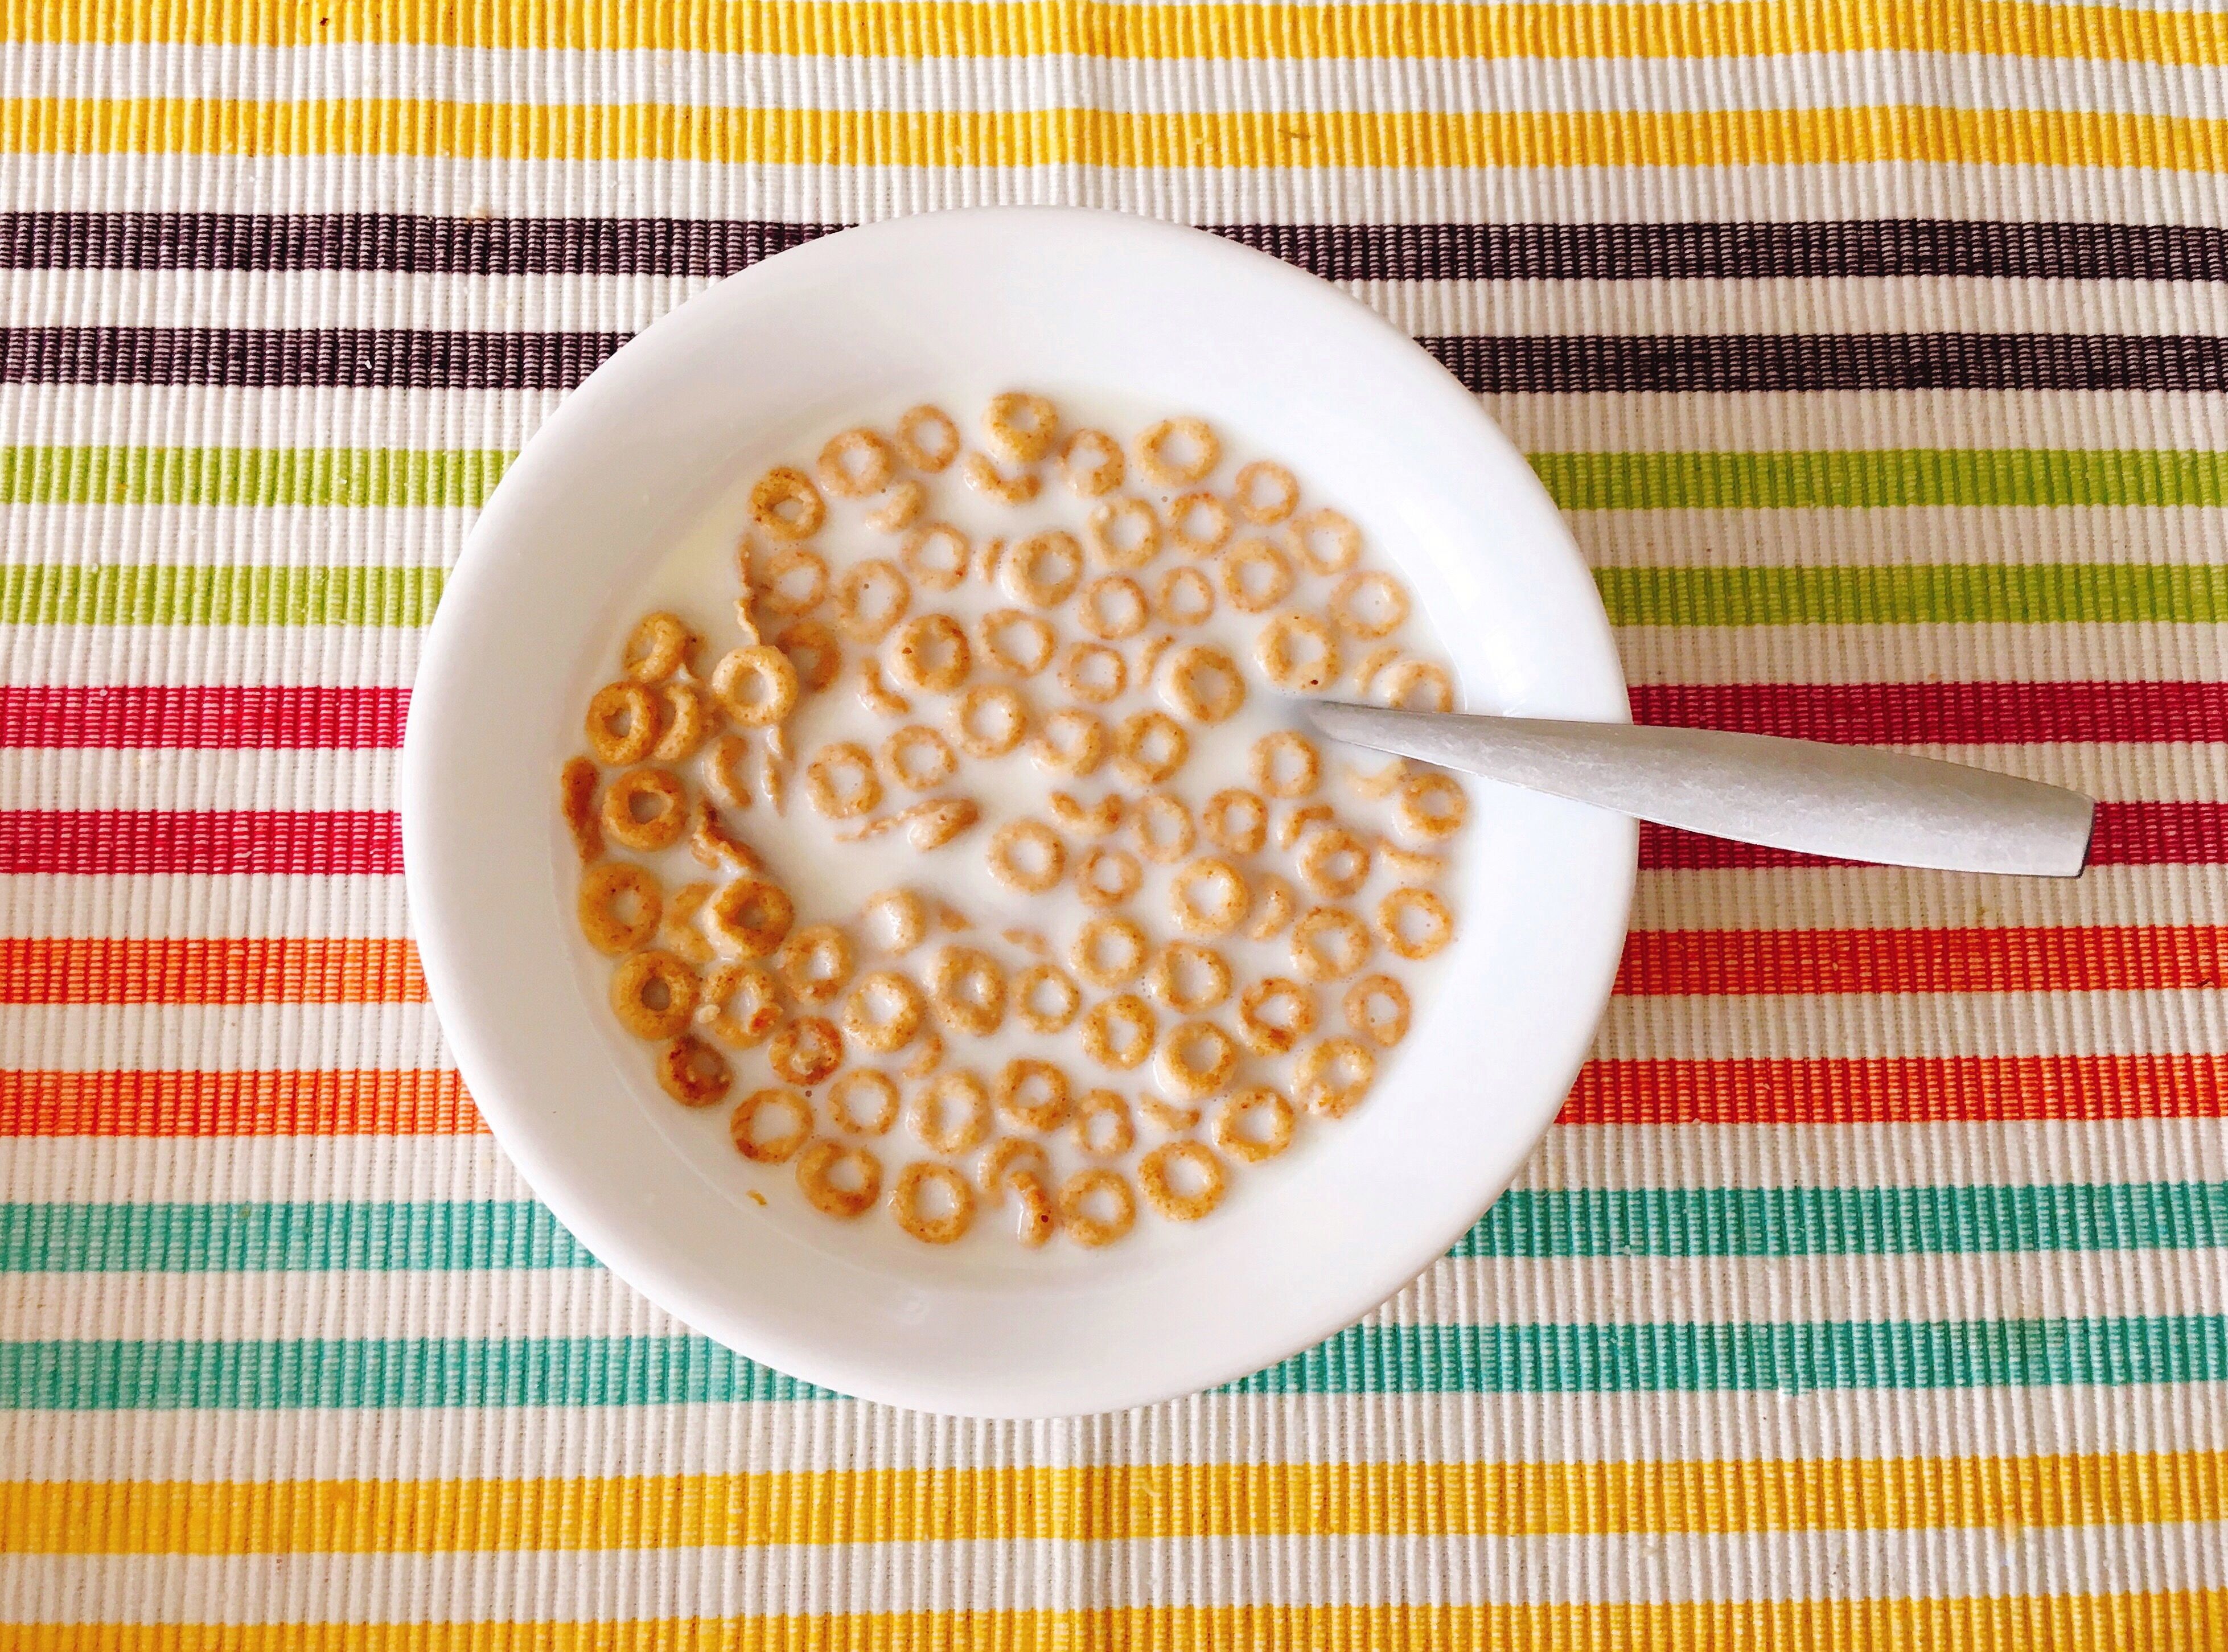 Are Honey Nut Cheerios Healthy? We Look Inside the Box - The New York Times